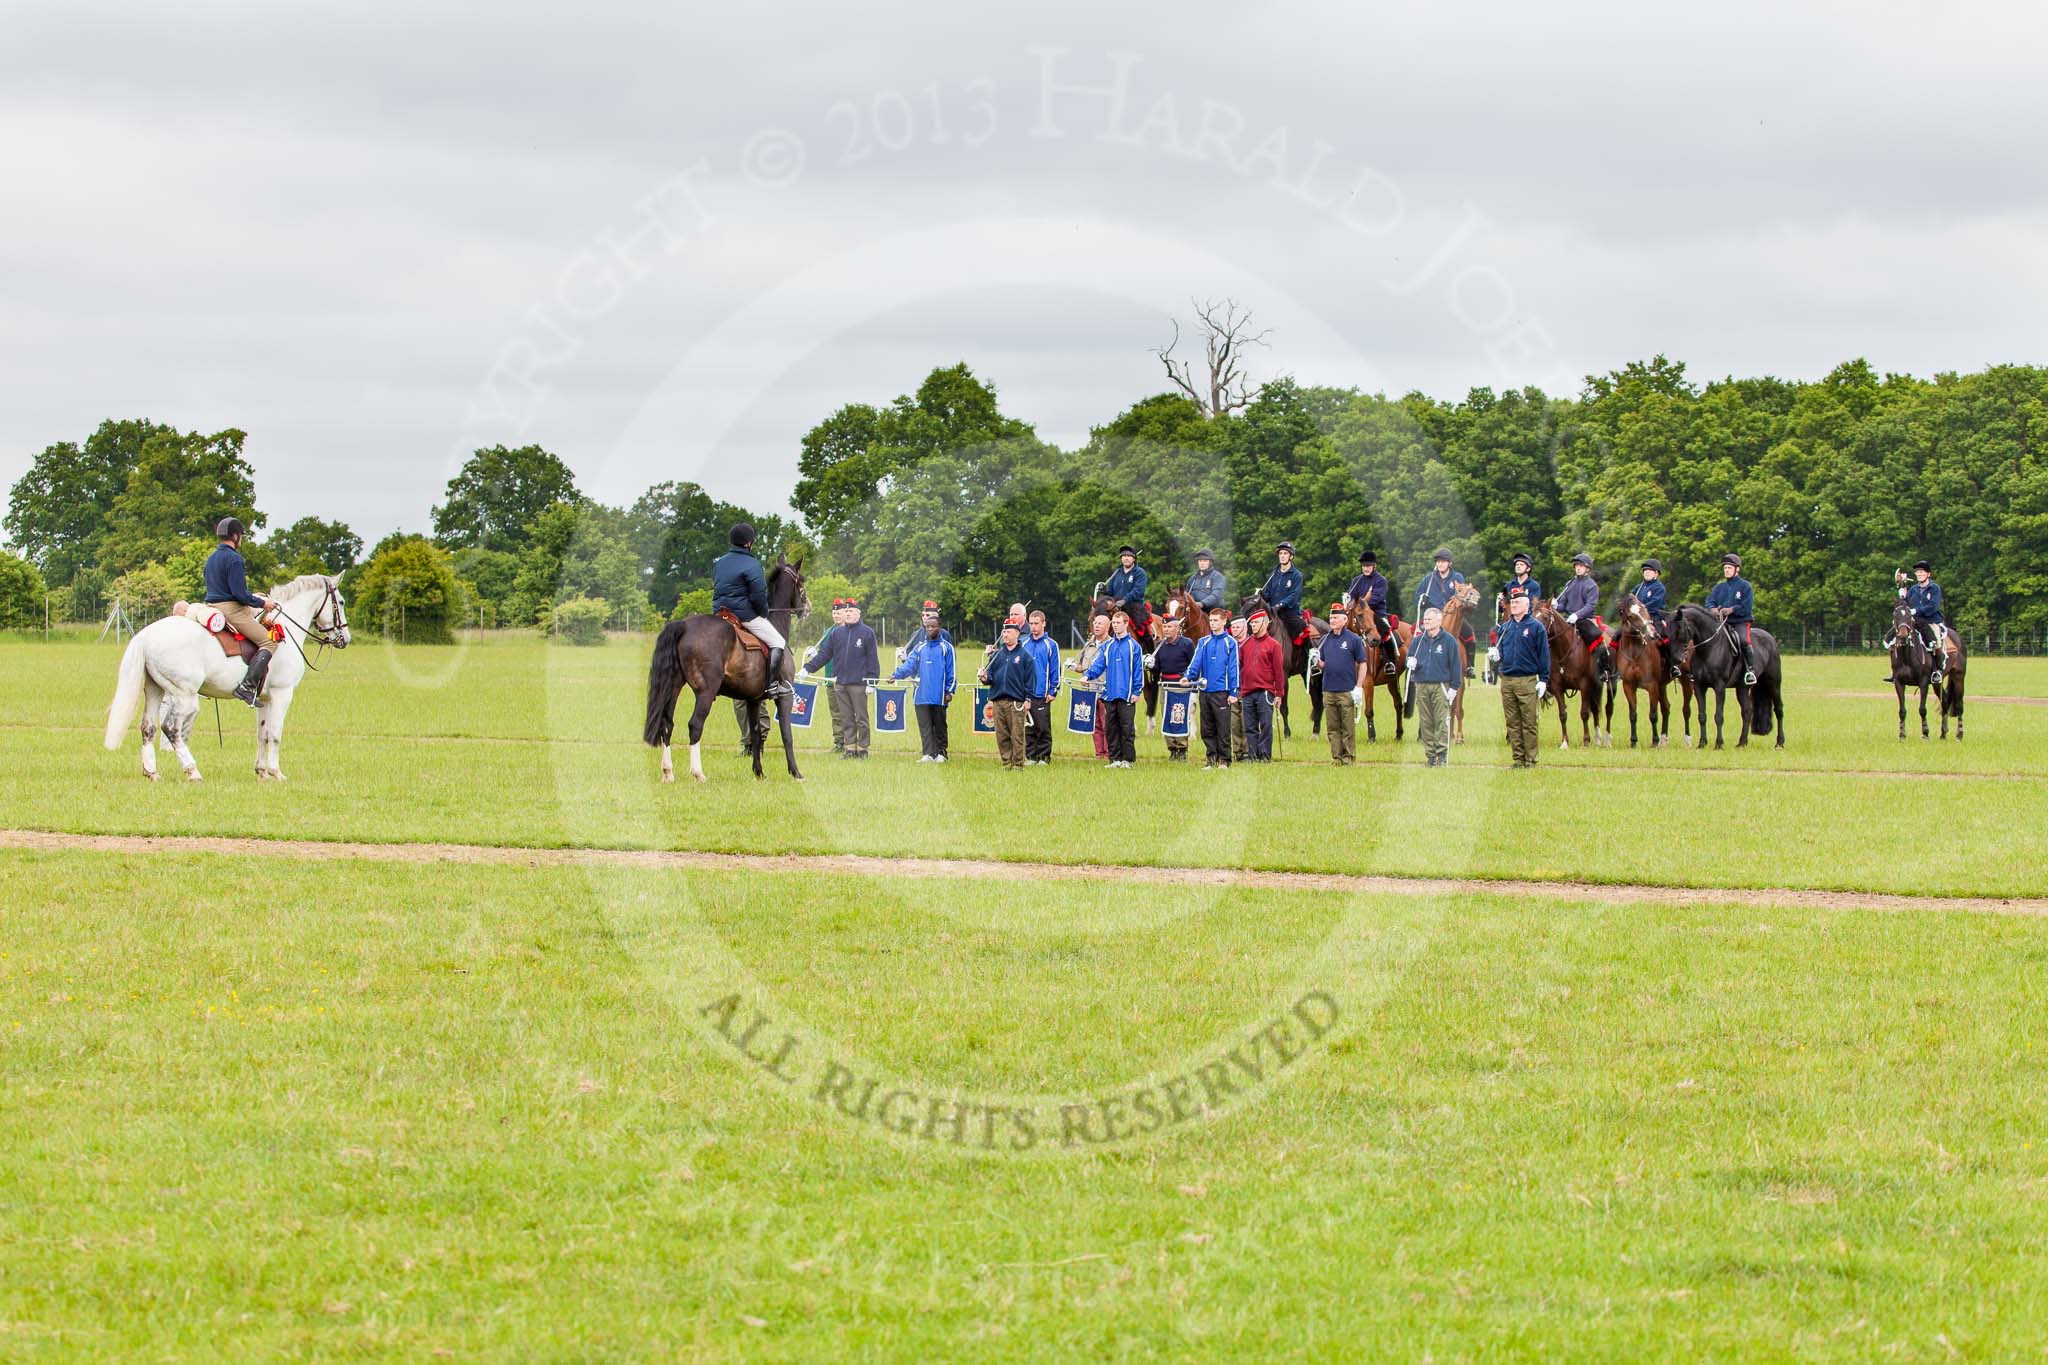 The Light Cavalry HAC Annual Review and Inspection 2013.
Windsor Great Park Review Ground,
Windsor,
Berkshire,
United Kingdom,
on 09 June 2013 at 10:53, image #104